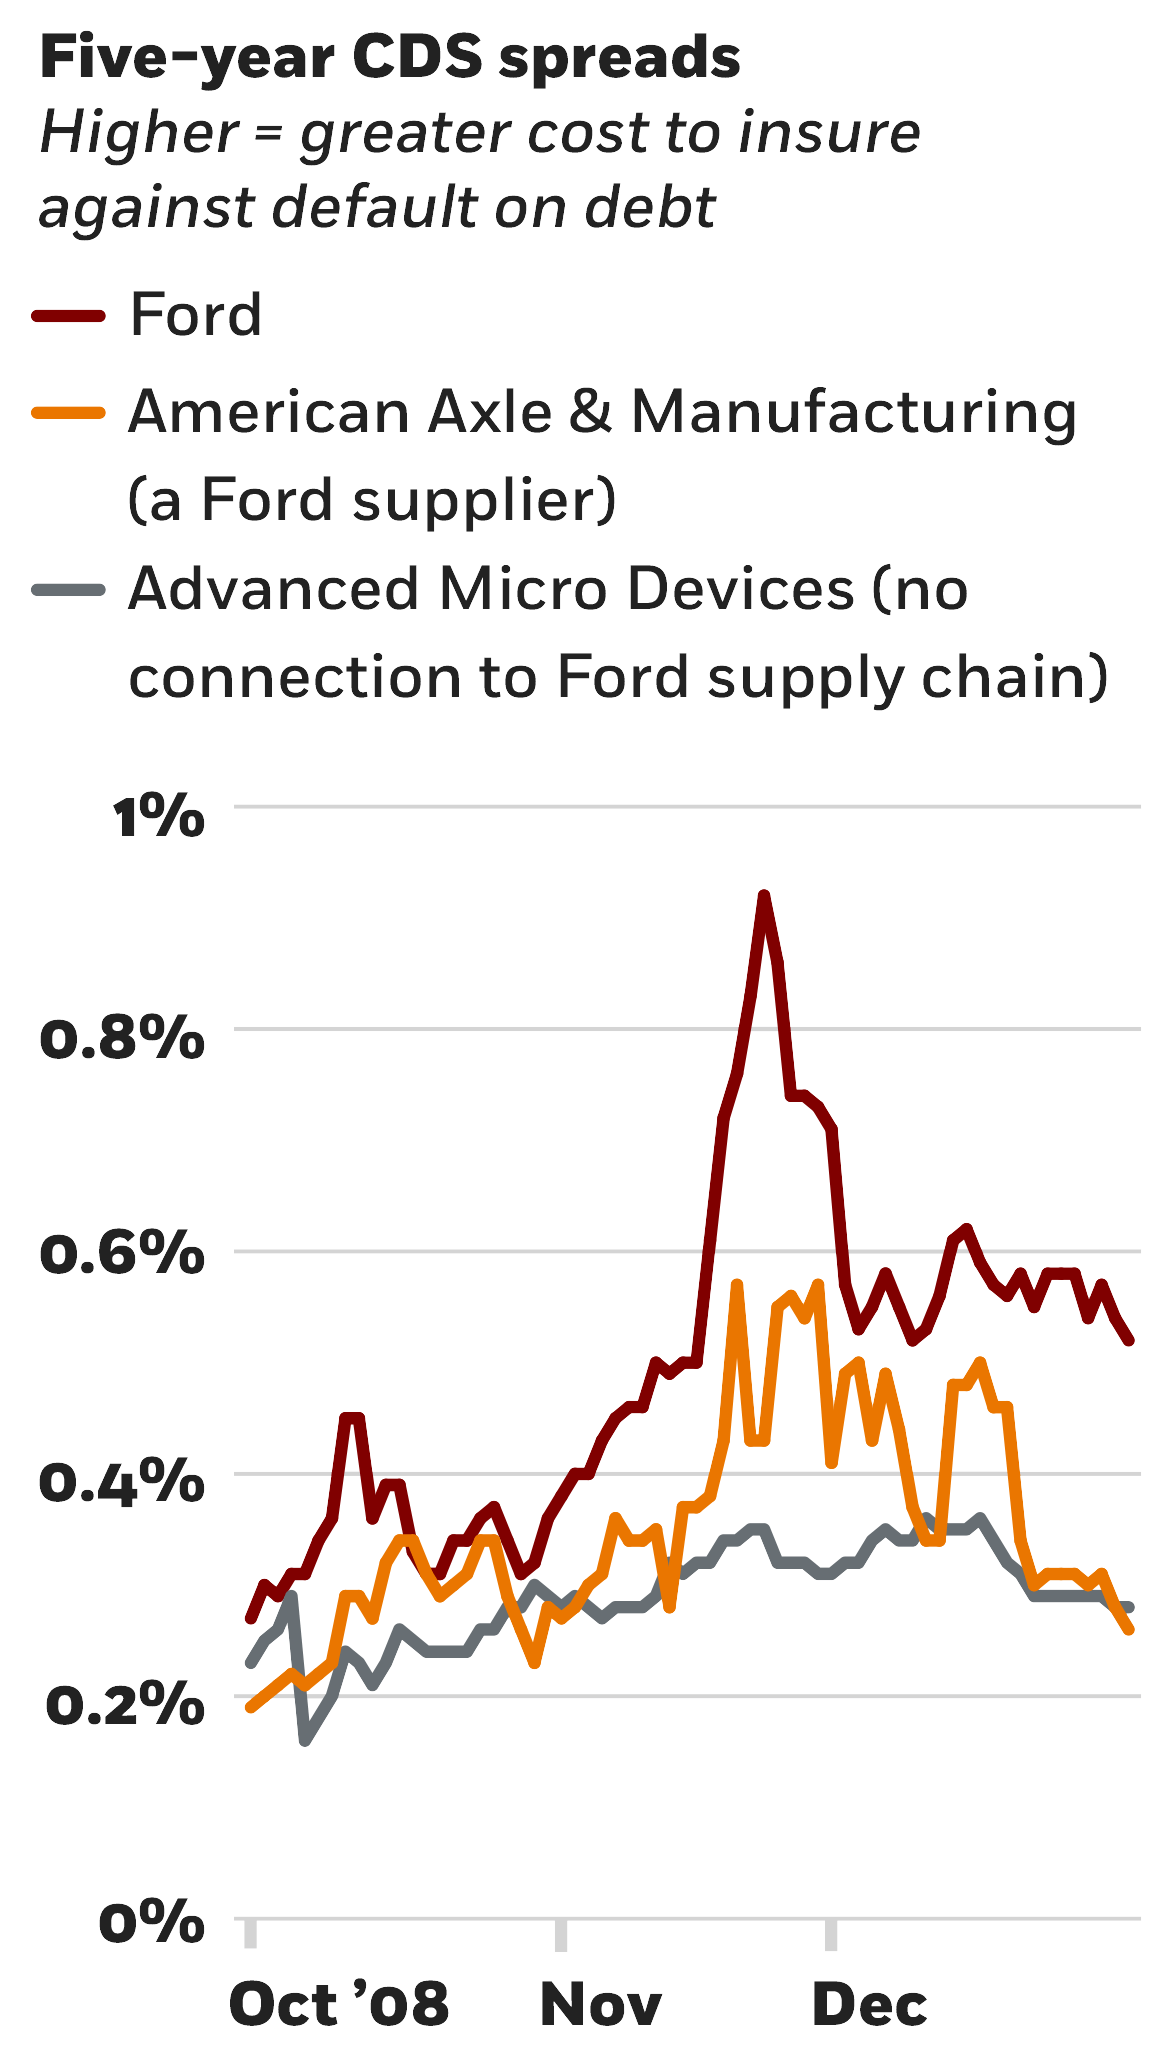 A line chart plotting five-year credit default swap spreads in late 2008 for three companies: Ford, American Axle and Manufacturing, which is a Ford supplier, and Advanced Micro Devices, which has no Ford connection. All three lines start at about zero-point-two-five-percent in October 2008. Ford’s rate rises, nearly reaching one percent in late November. American Axle’s spread fluctuates in a pattern similar to Ford’s. And AMD’s spread holds steady compared to the others.